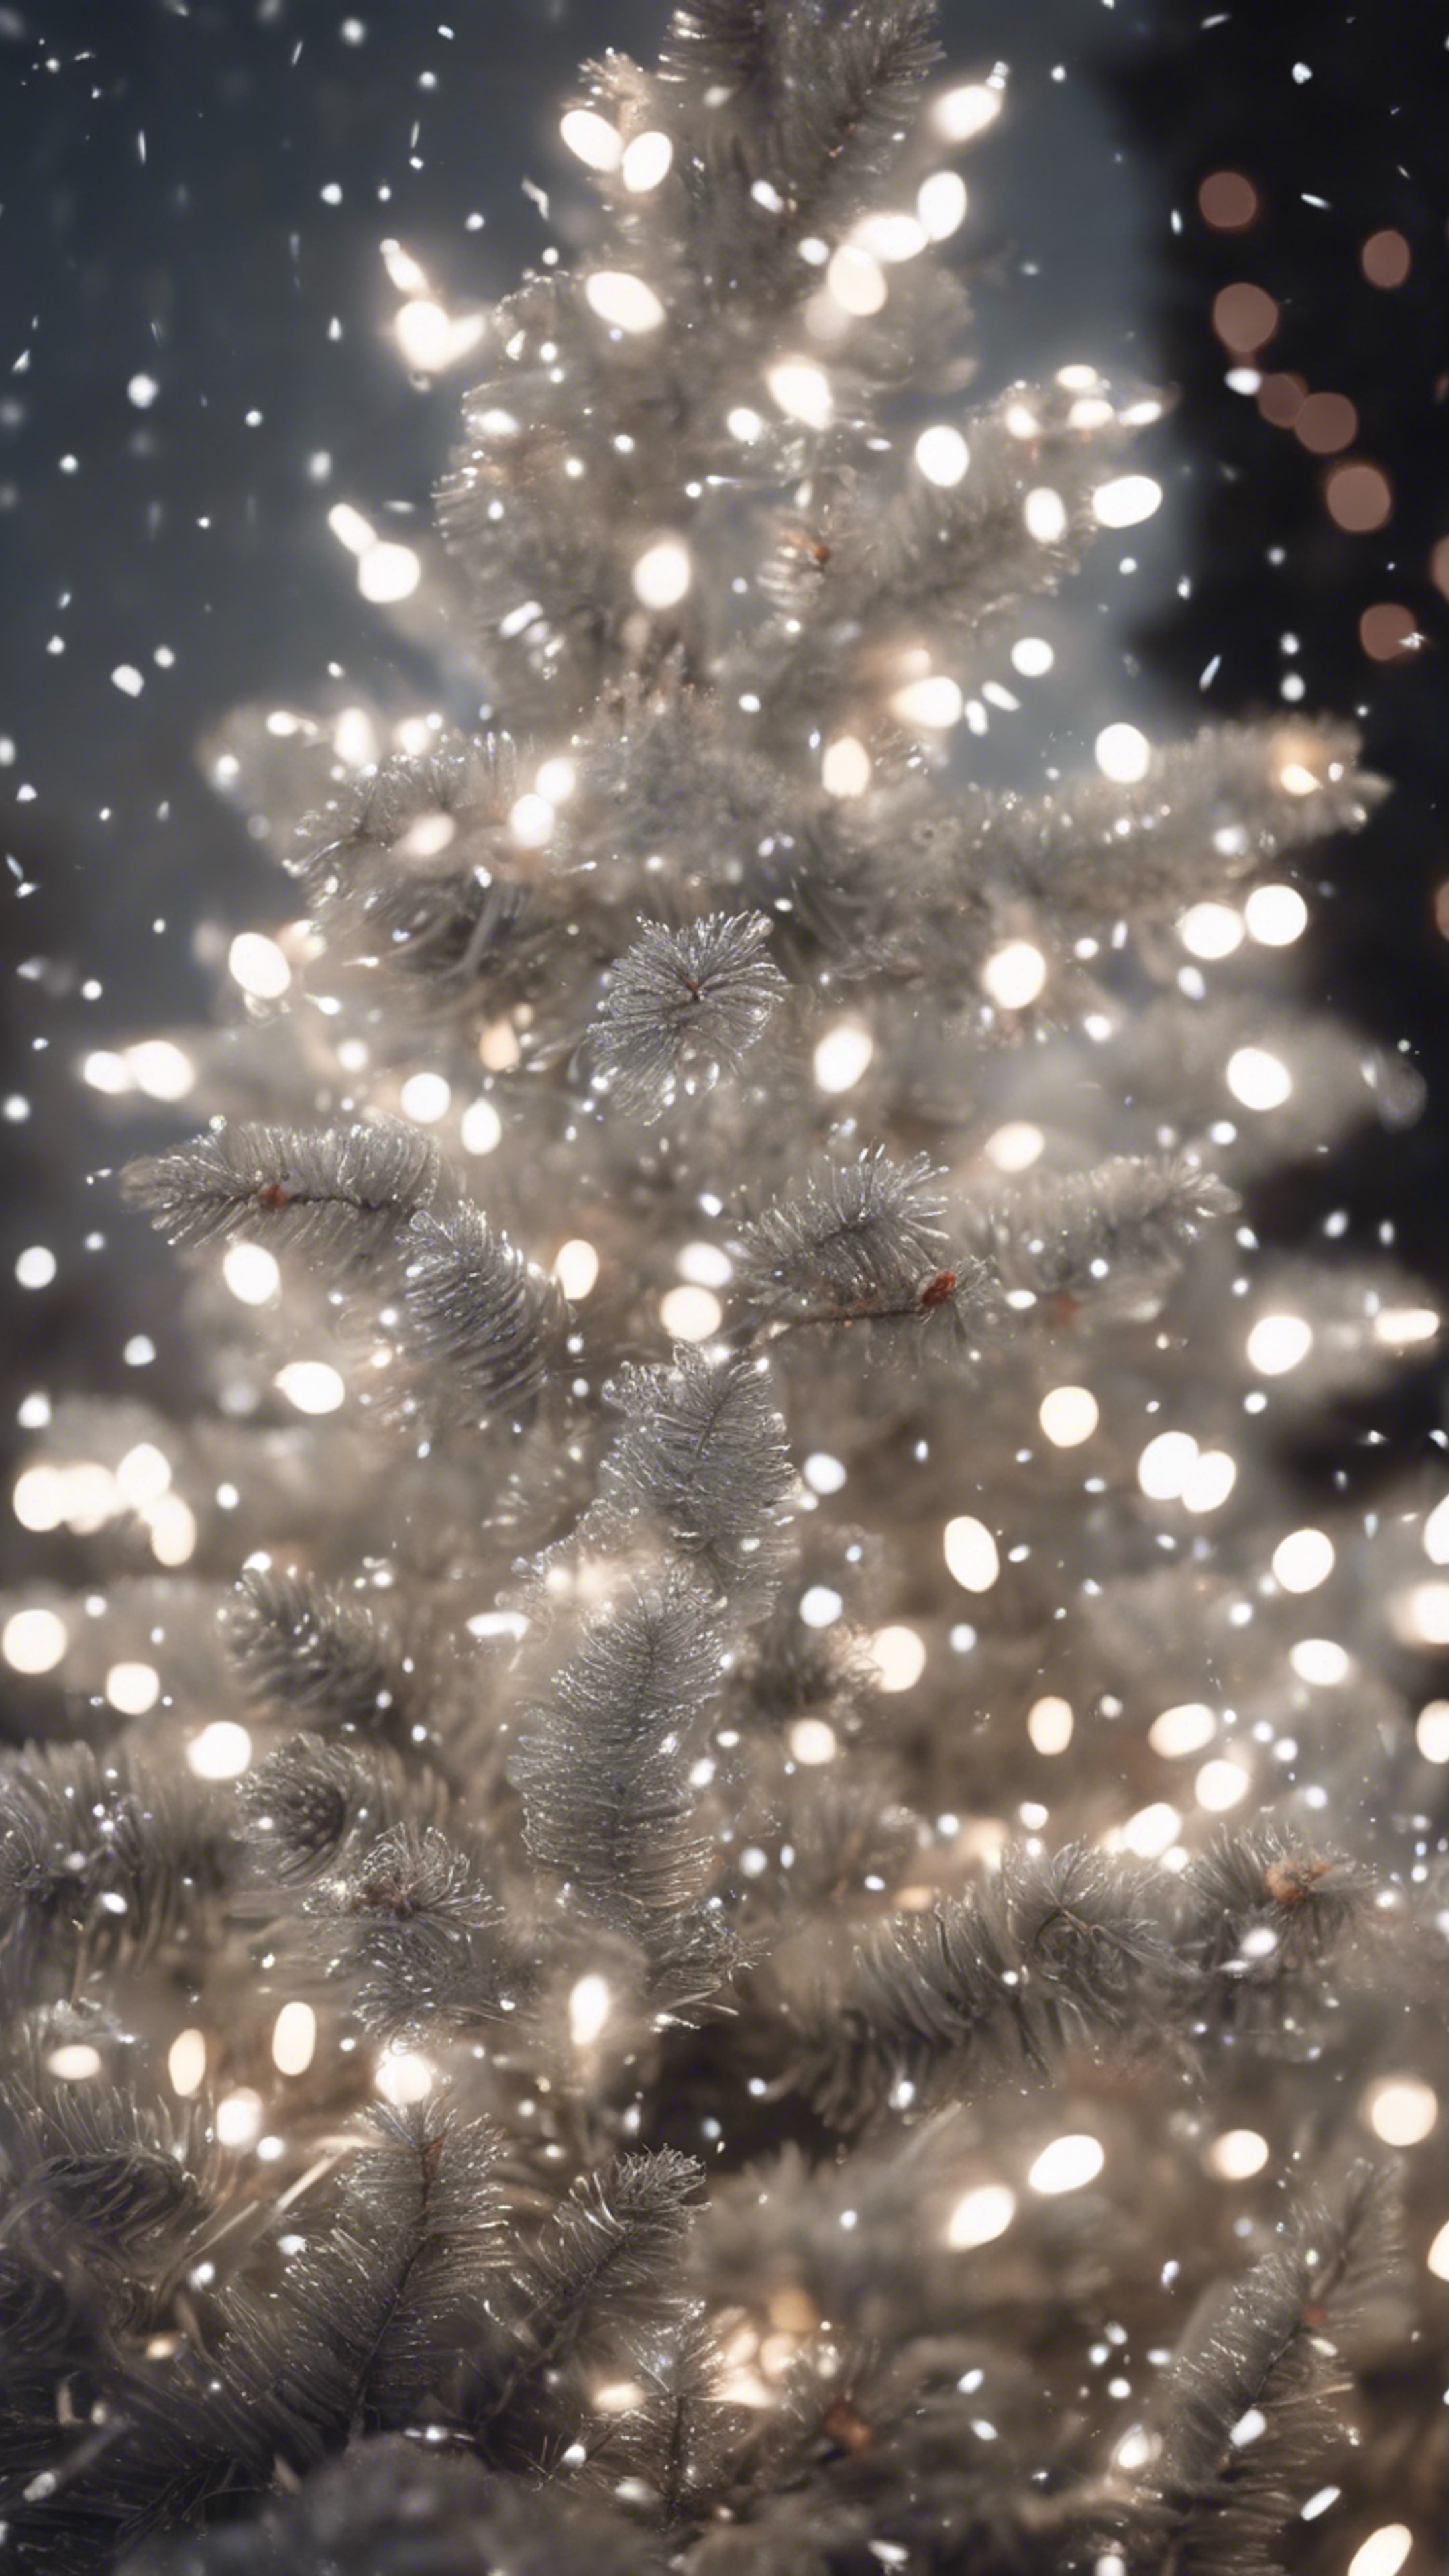 White Christmas lights shimmering on a silver spruce tree, with delicate snowflakes falling around. Tapeta[aebc3baa8421448a9f7c]